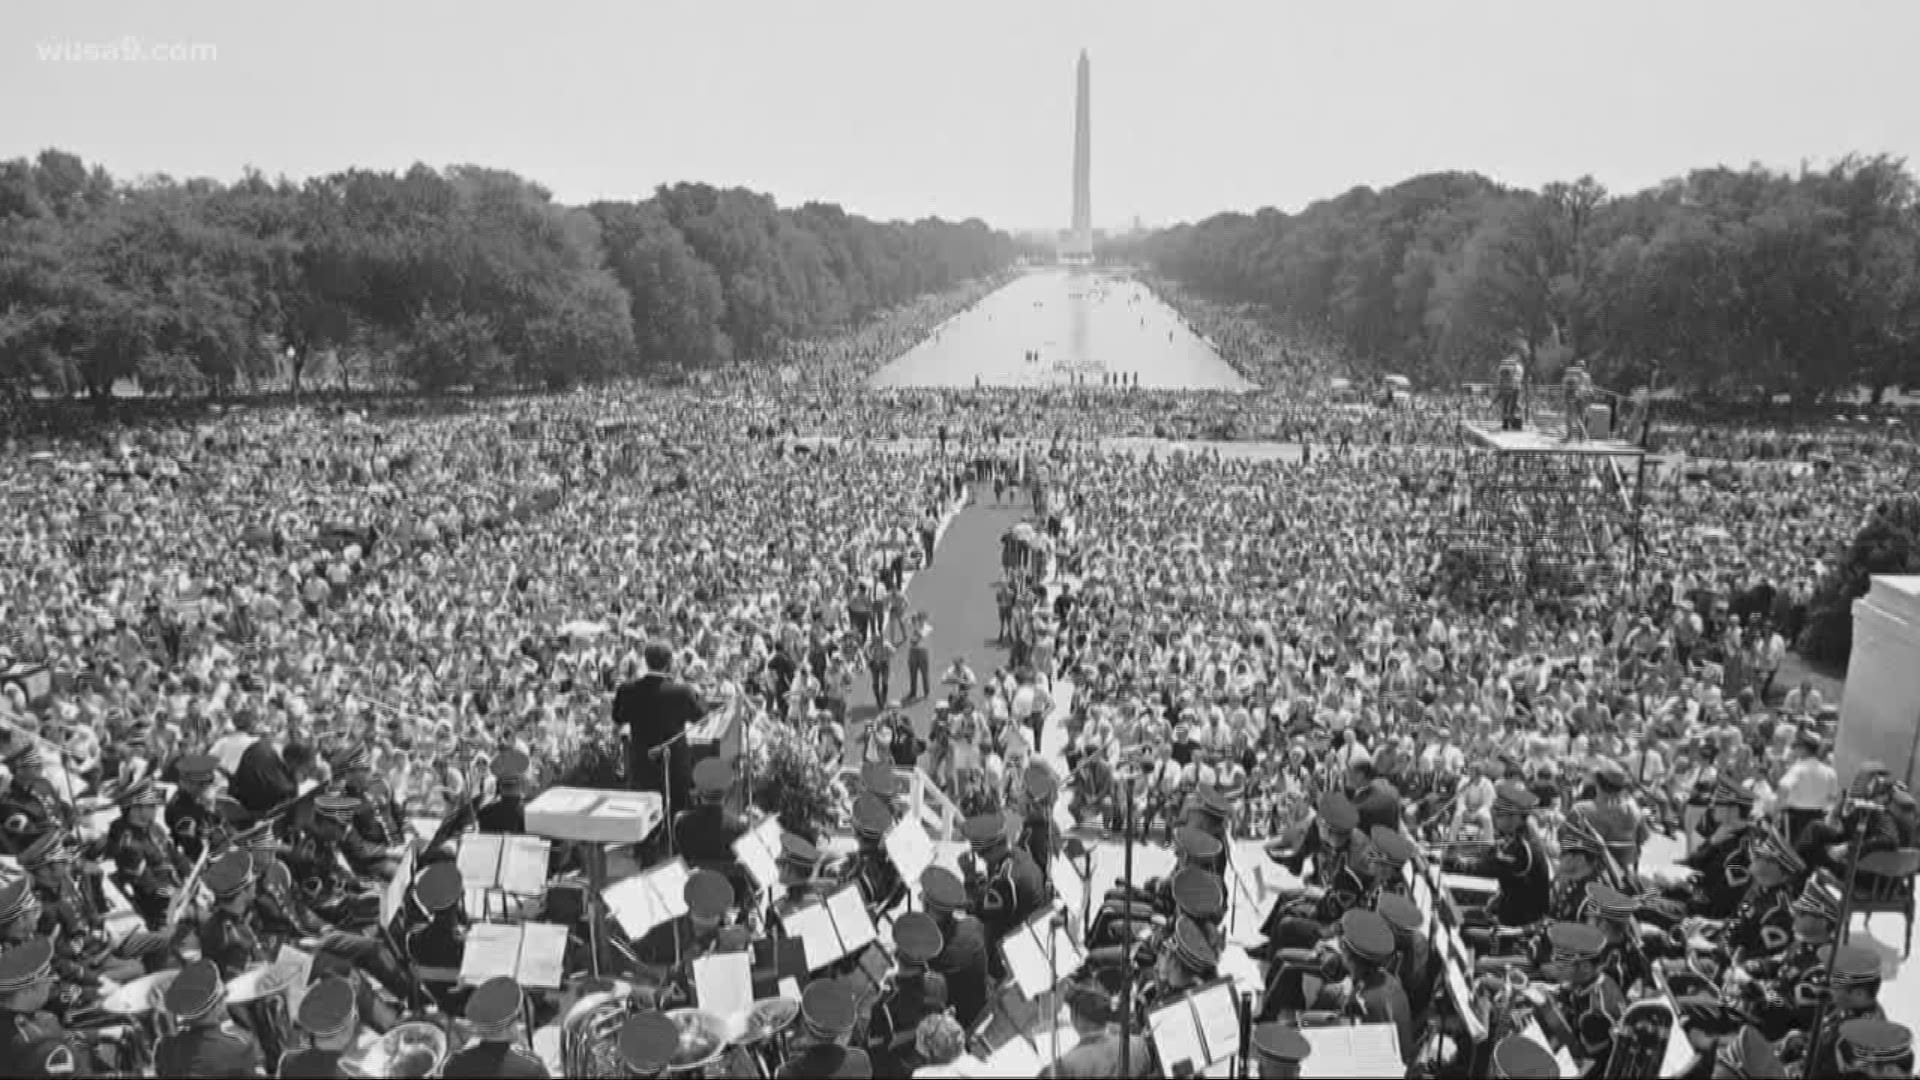 The President calls his celebration one of the biggest gatherings in our city's history. Sound familiar? President Nixon staged "Honor America Day" in the 70's. Let's just say, it wasn't a big hit.